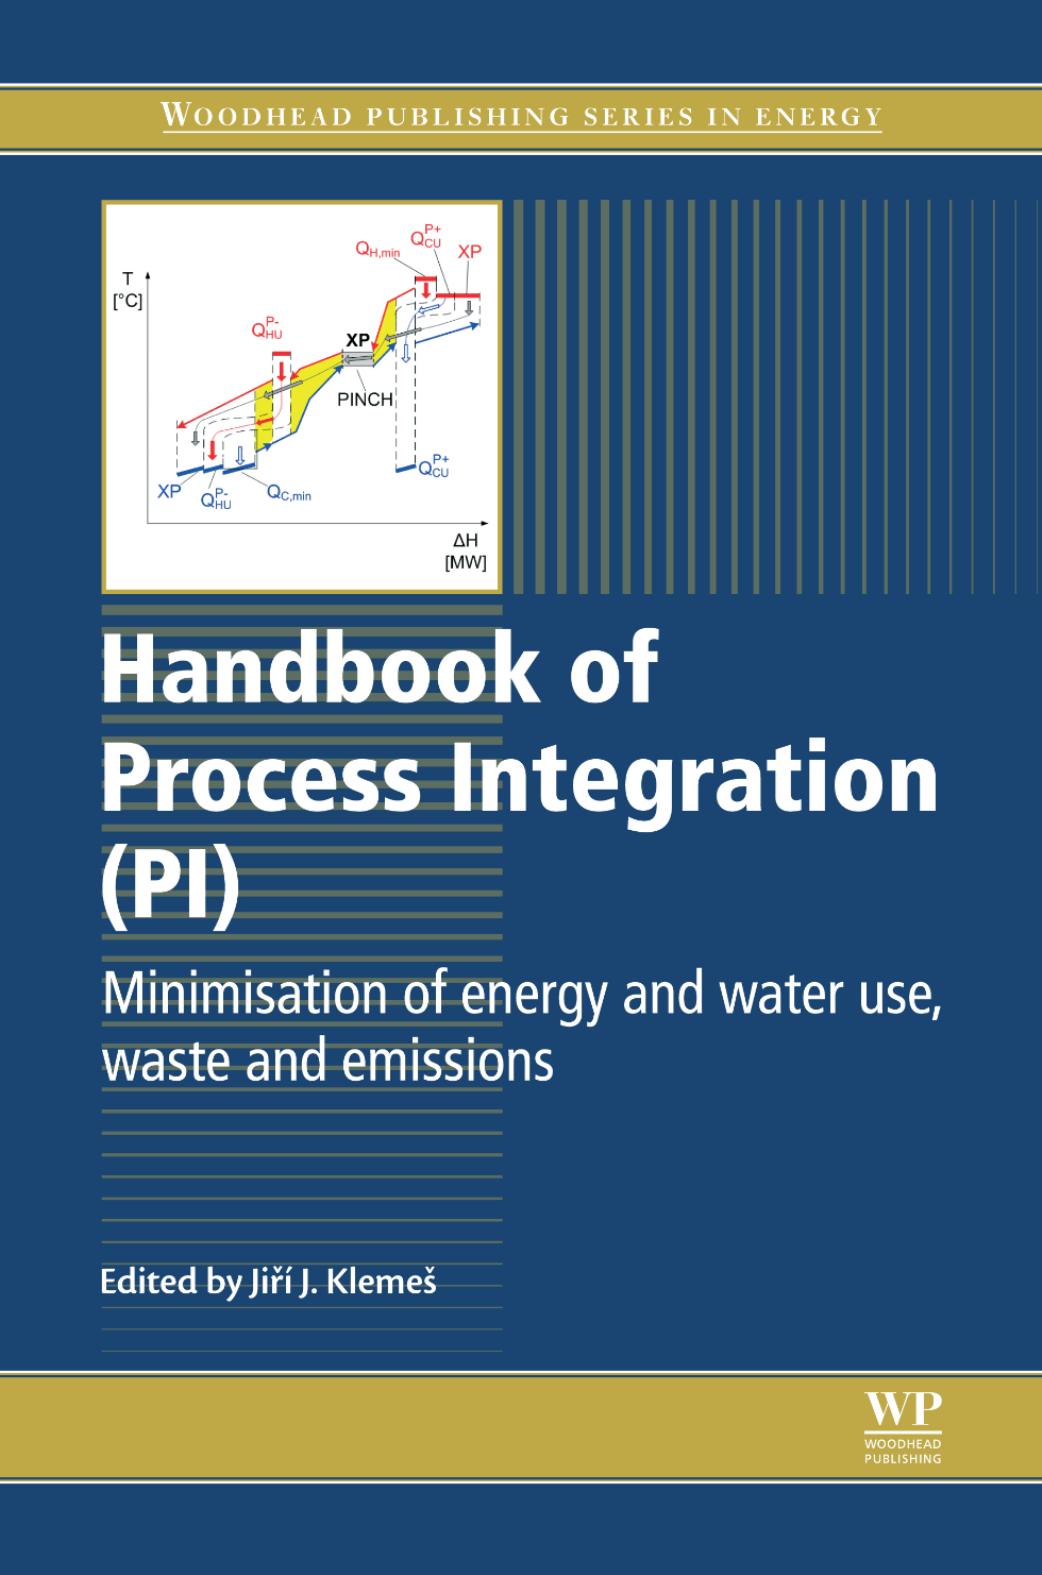 061. Handbook of Process Integration (PI) by Minimisation of Energy & Water Use Waste & Emissions (2013)